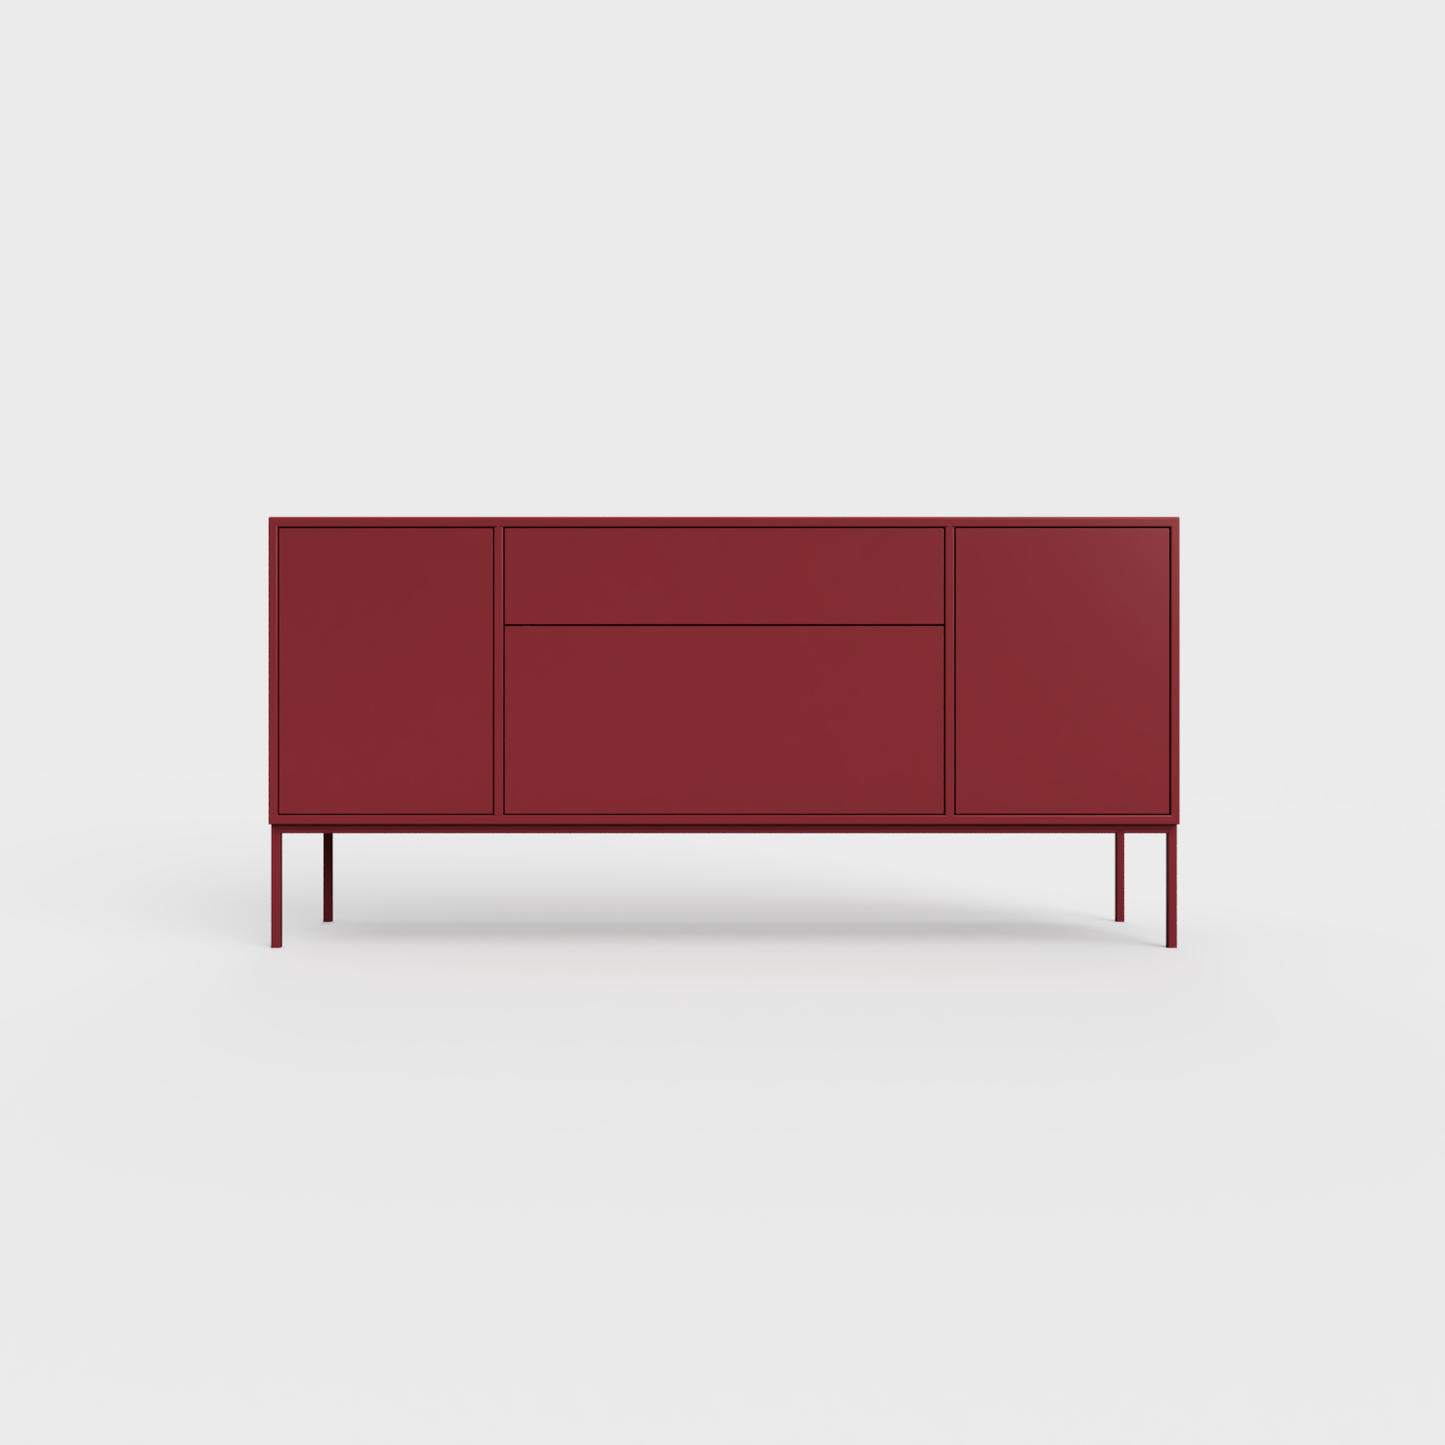 Arnika 02 Sideboard in Ruby color, powder-coated steel, elegant and modern piece of furniture for your living room